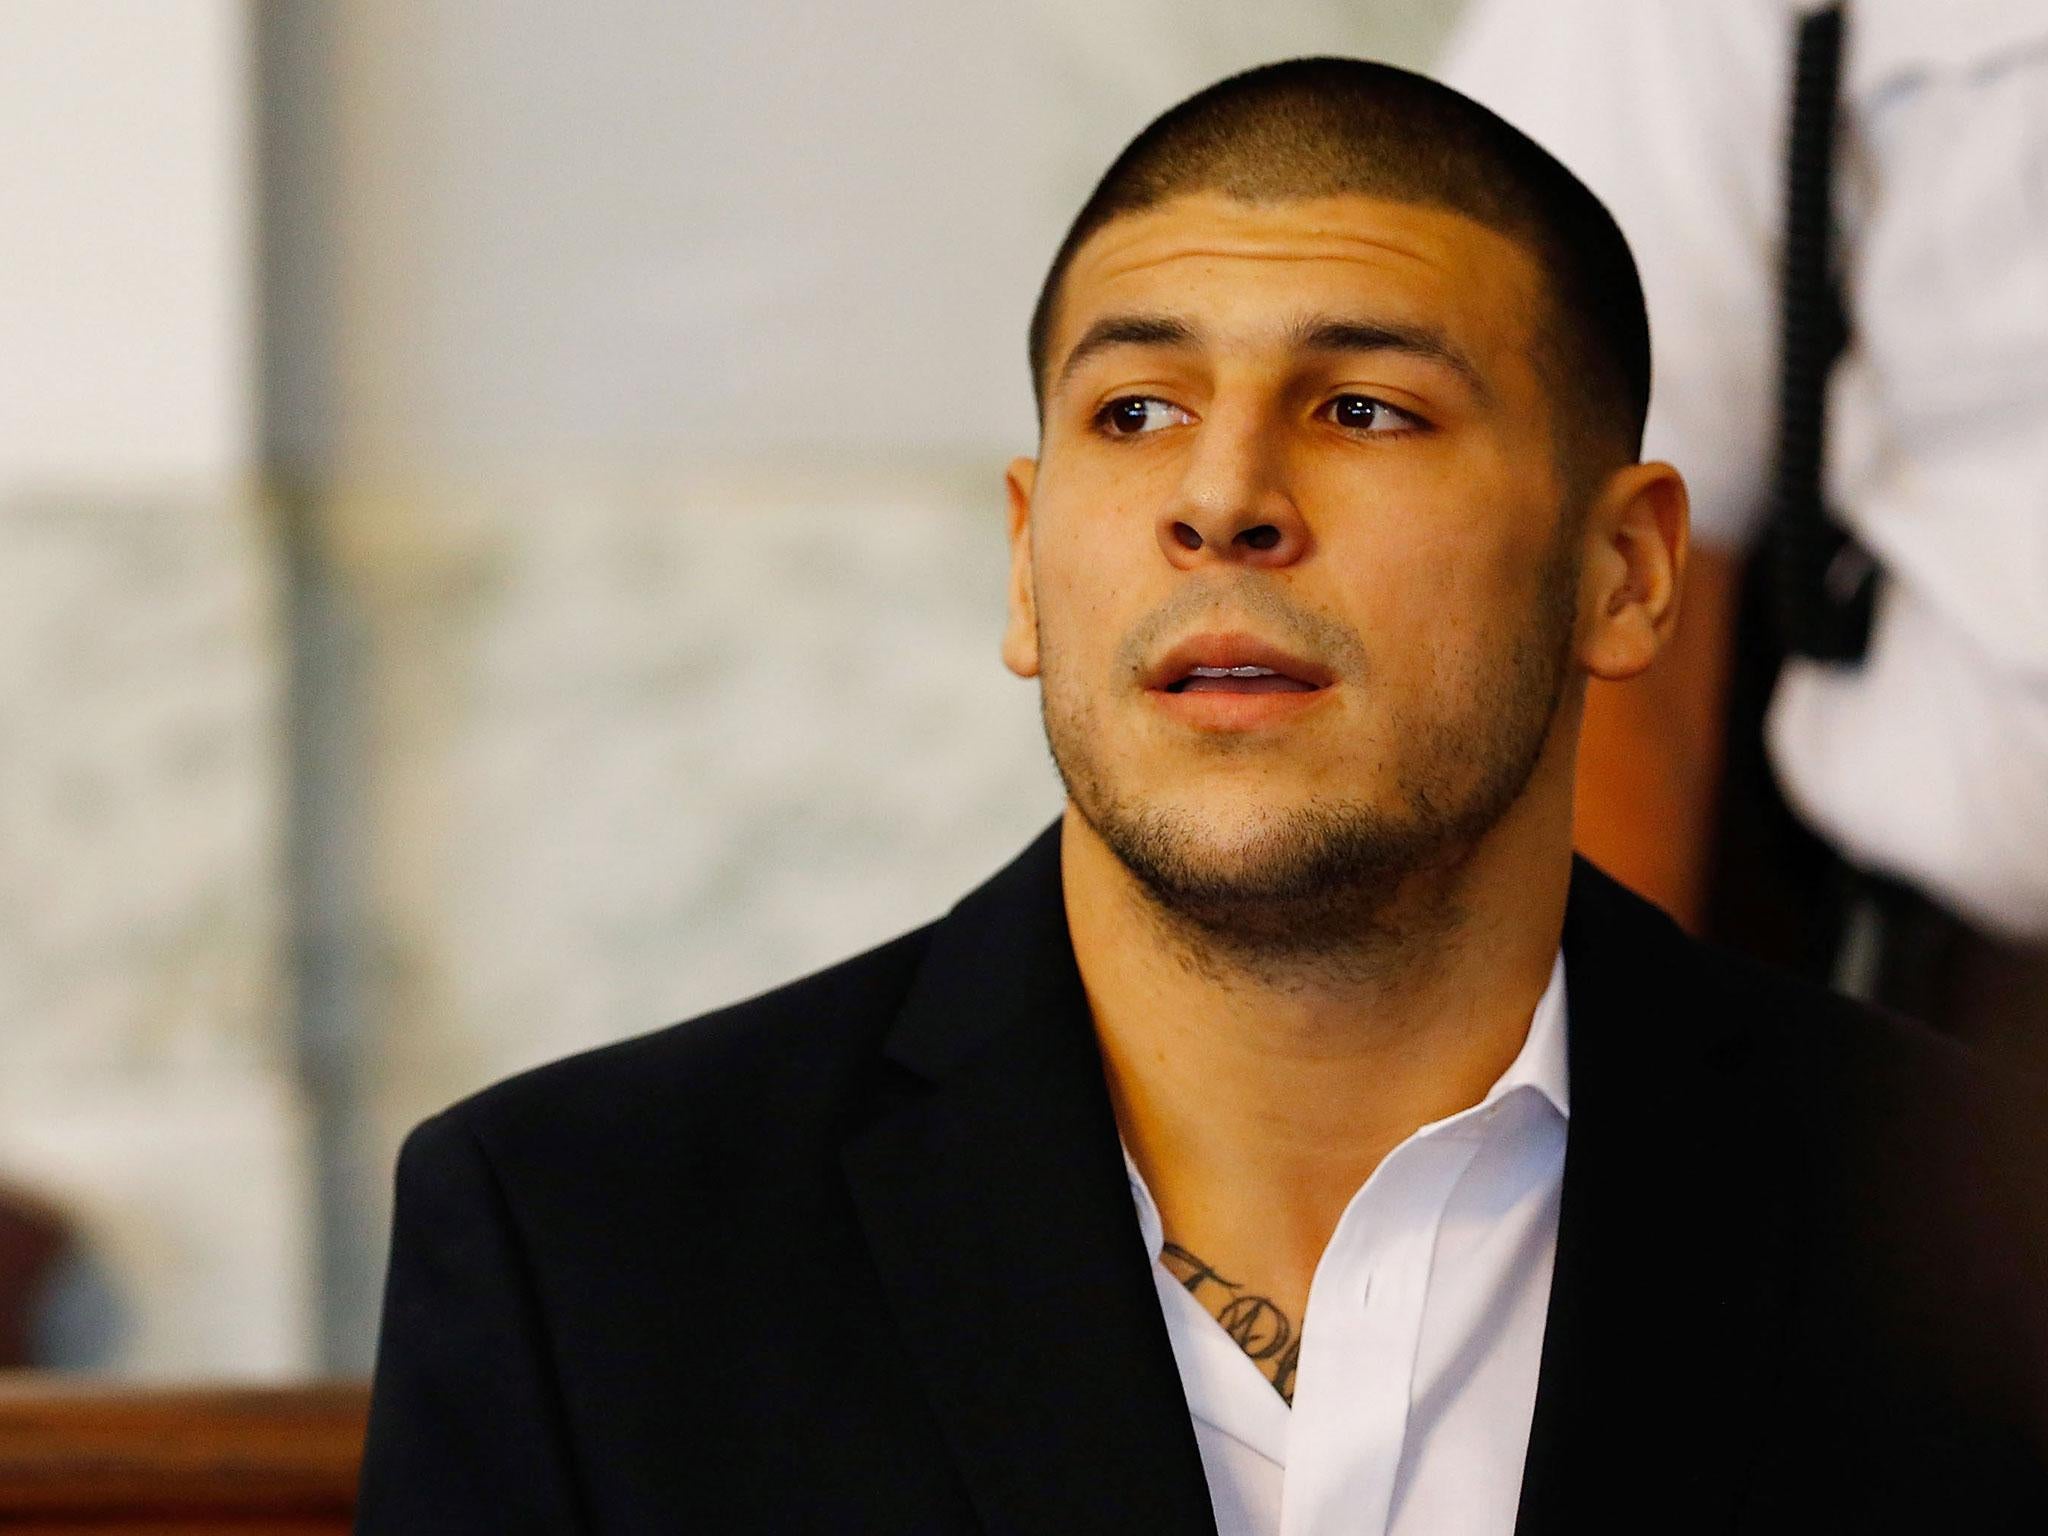 Hernandez was found dead in his cell on Wednesday